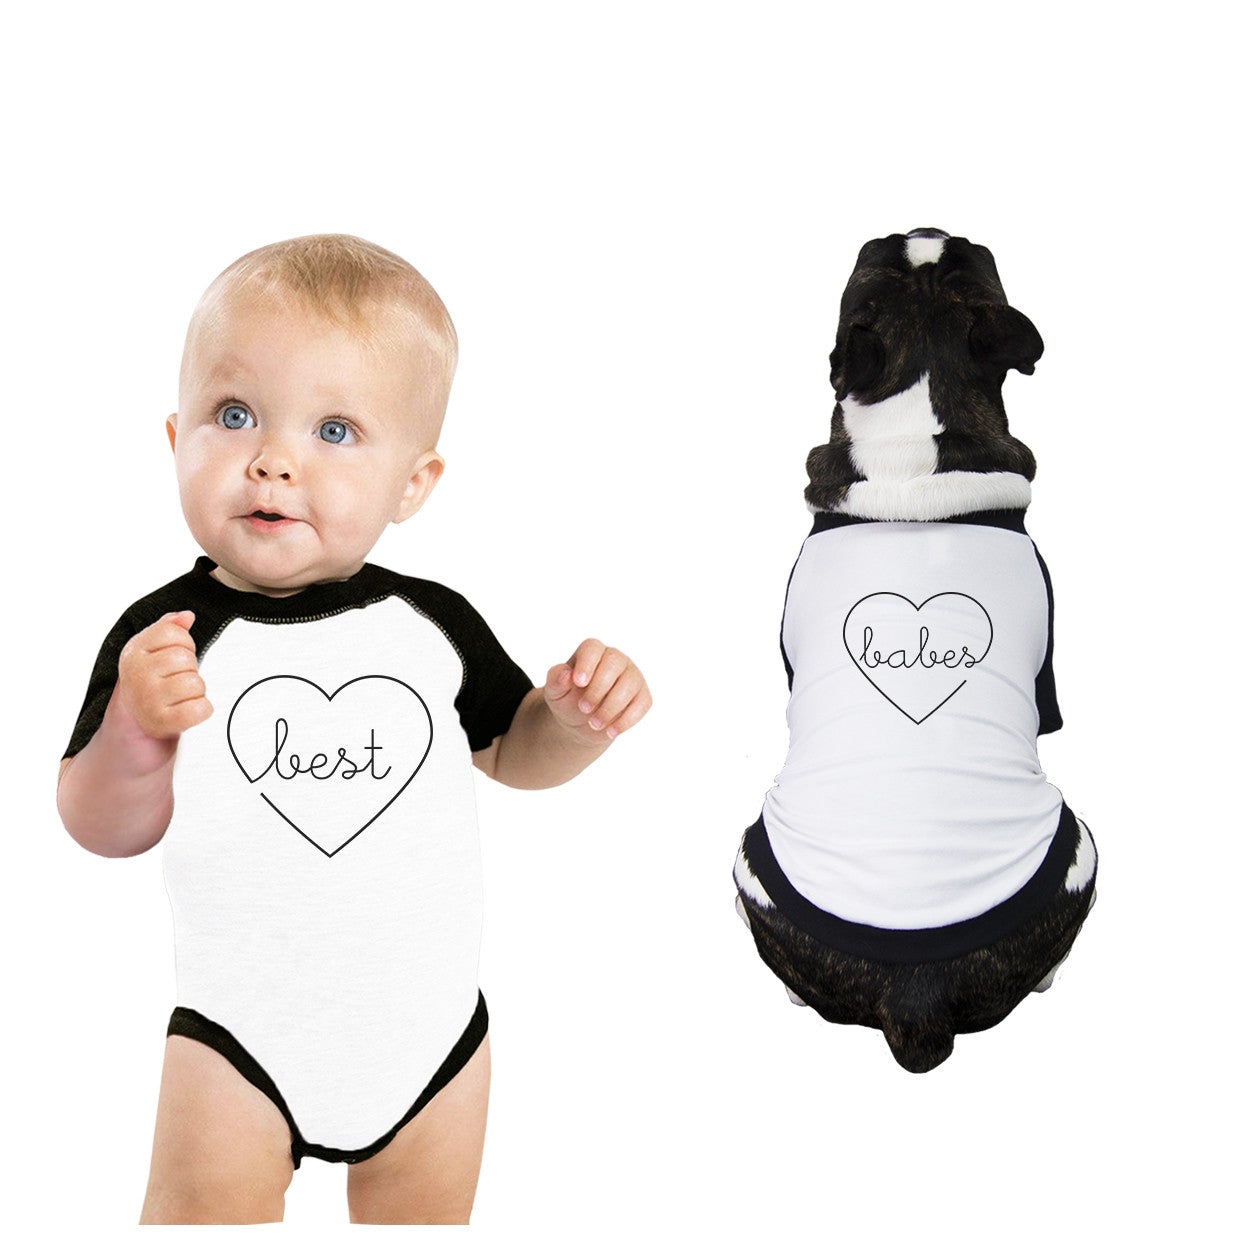 Best Babes Baby and Pet Matching Black And White Baseball Shirts